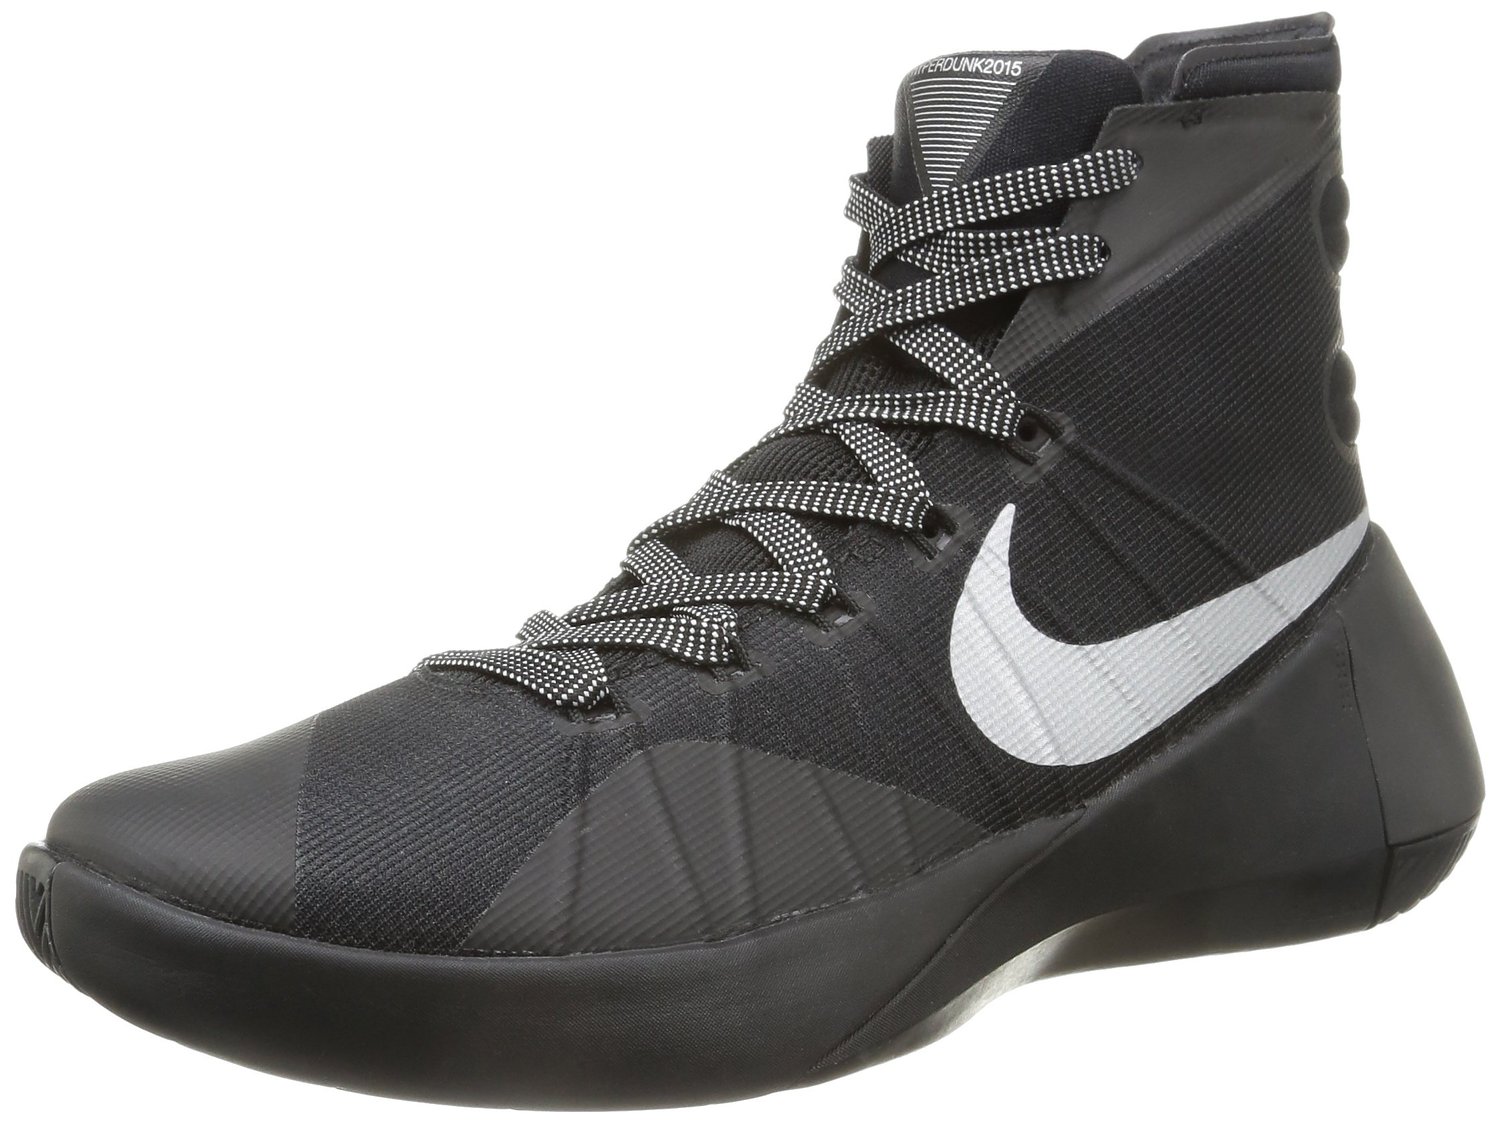 Nike Hyperdunk 2015 Review | Is It Really Good? - Live For BBALL